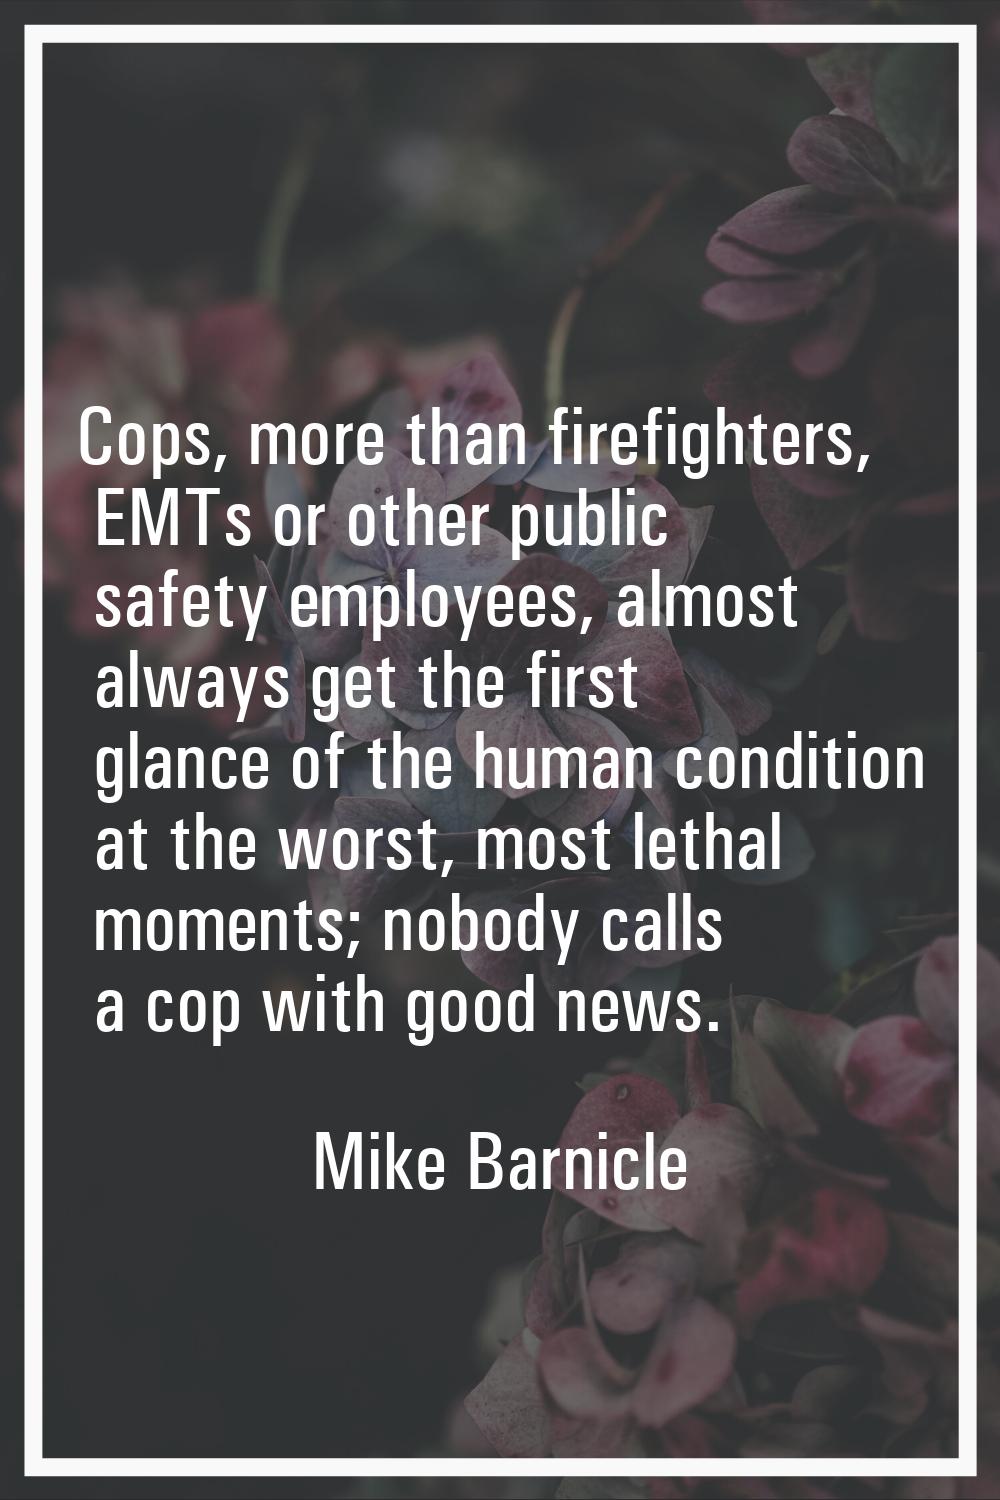 Cops, more than firefighters, EMTs or other public safety employees, almost always get the first gl